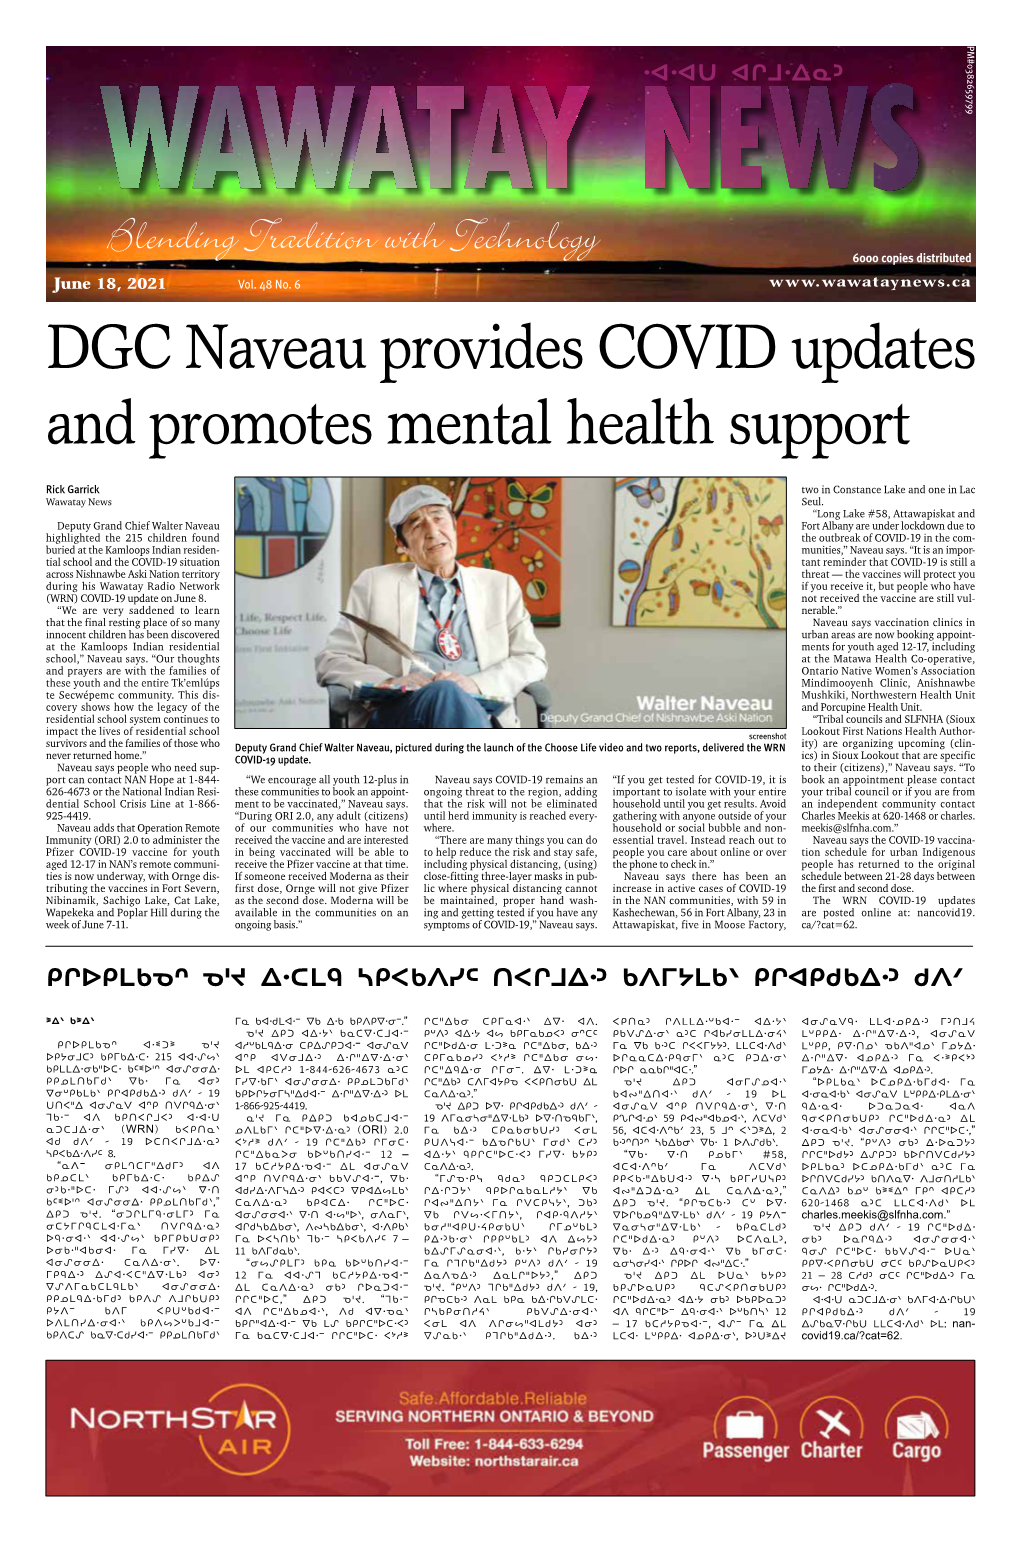 DGC Naveau Provides COVID Updates and Promotes Mental Health Support